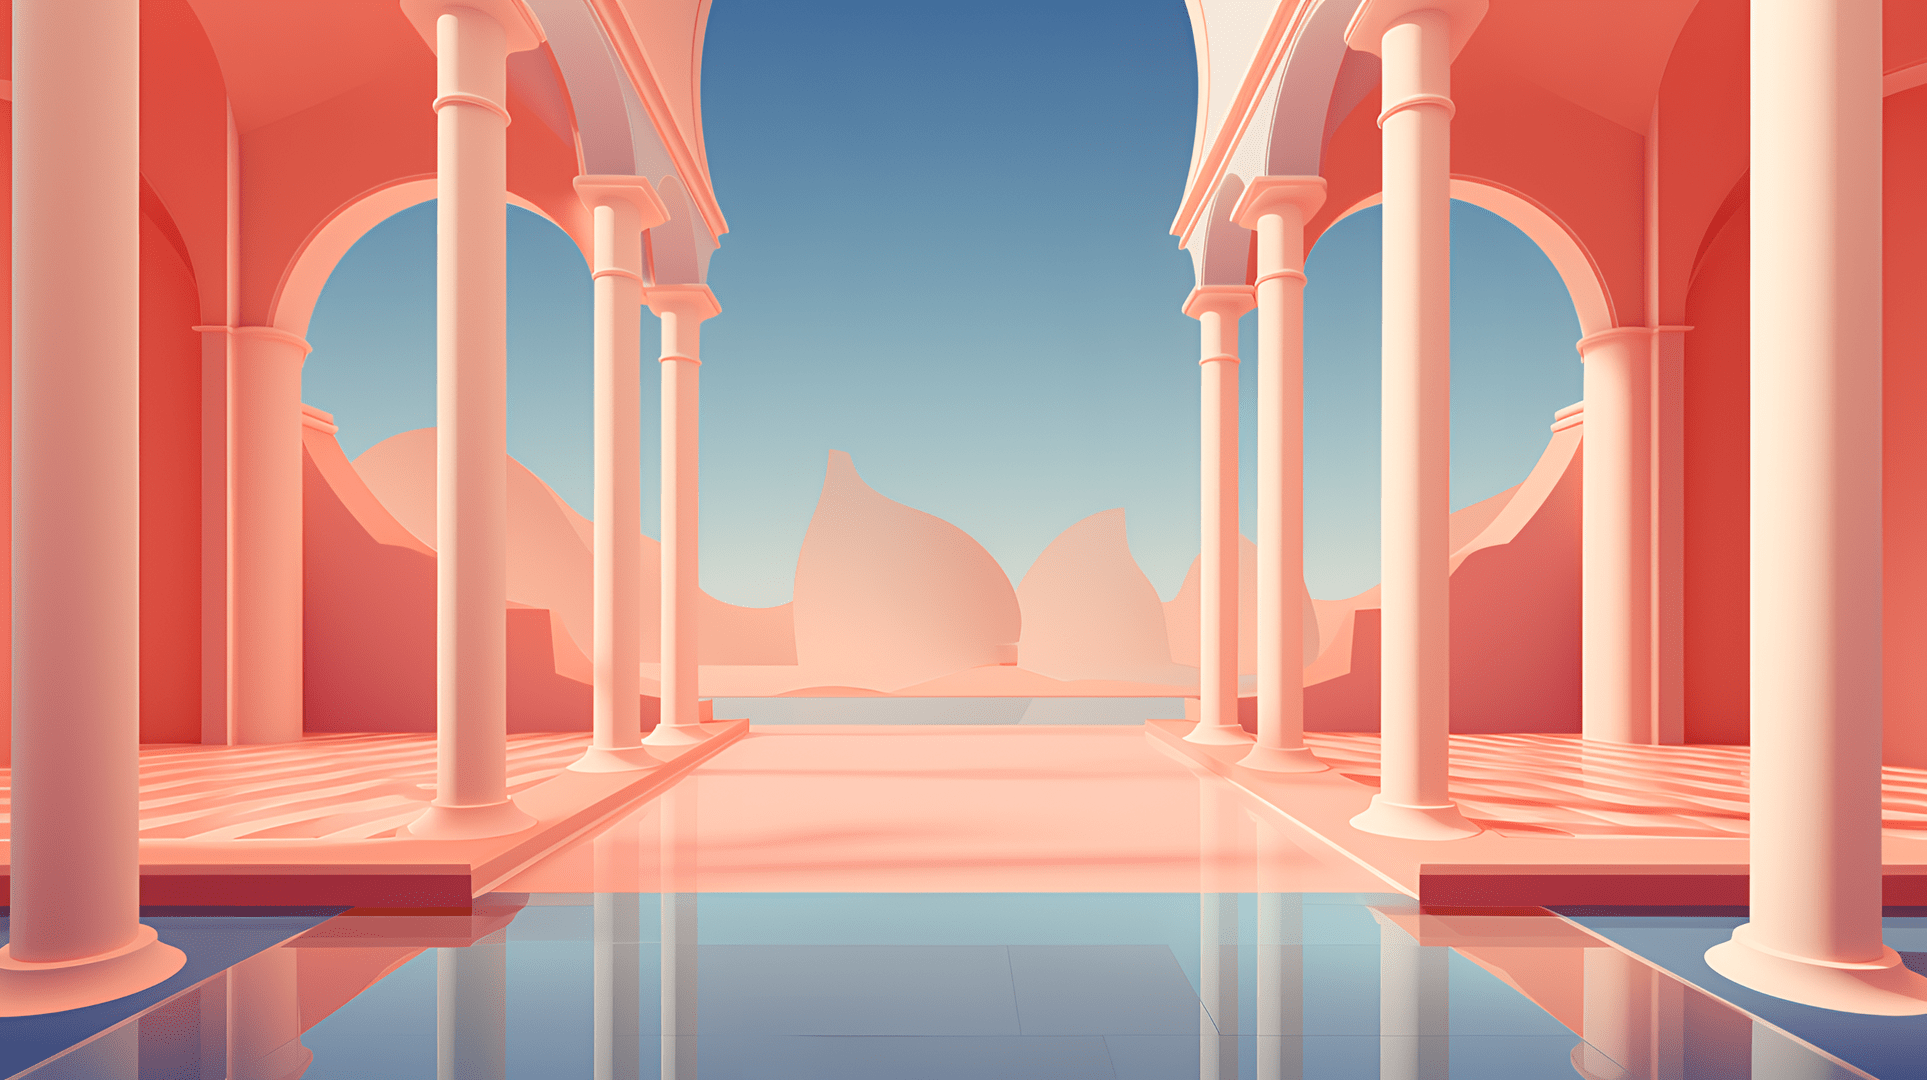 An image of a pink palace with arches and pillars. - Arcade